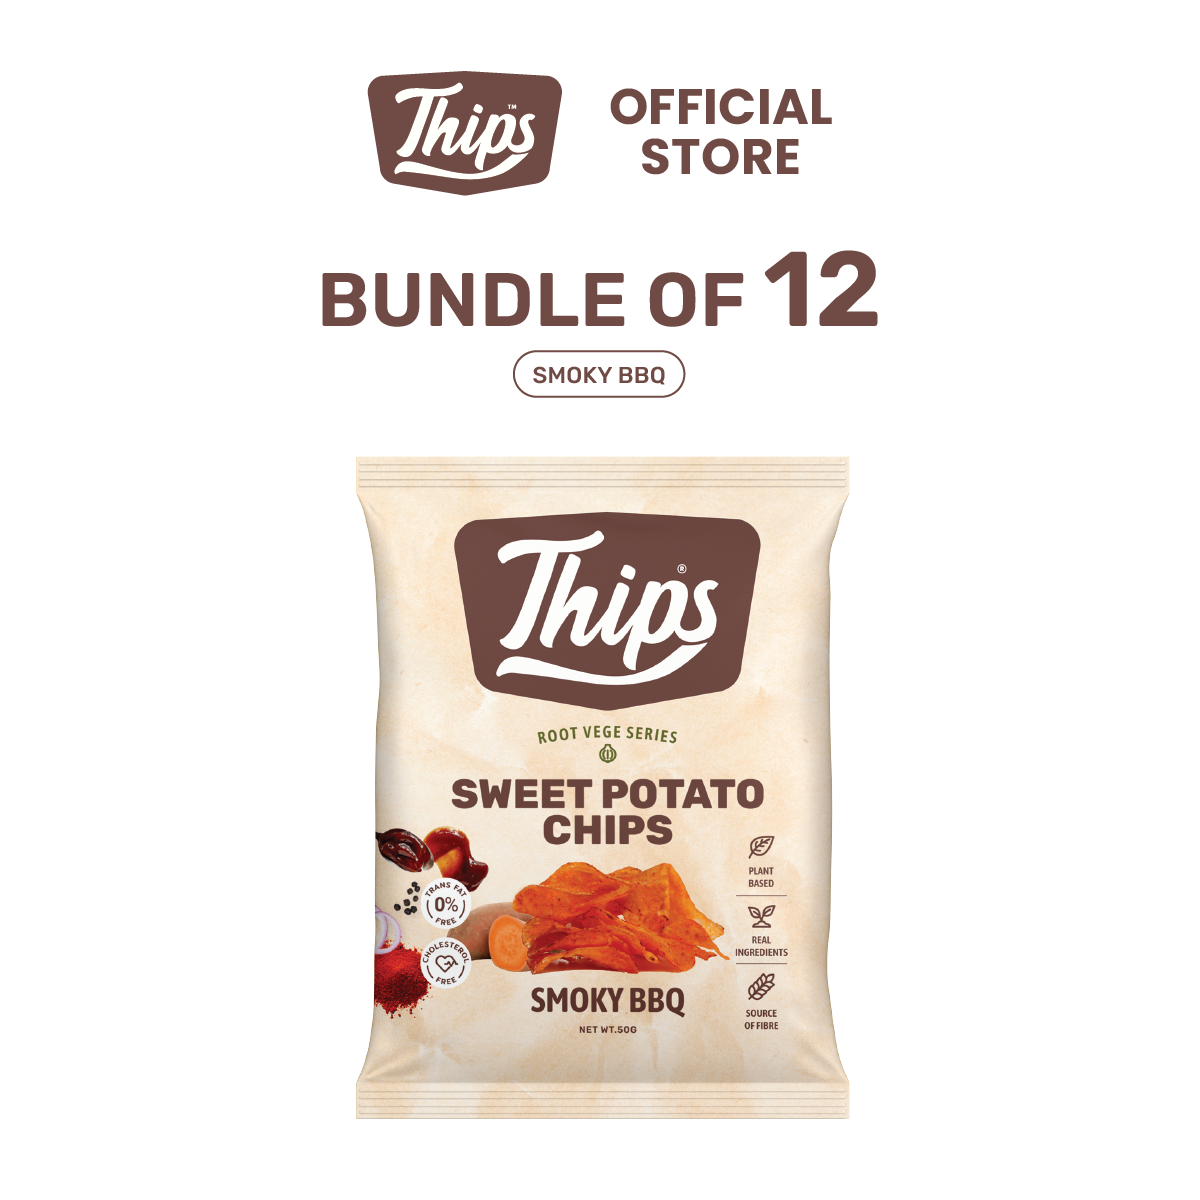 [Subscription Plan - Bundle of 12] Thips Smoky BBQ Sweet Potato Chips